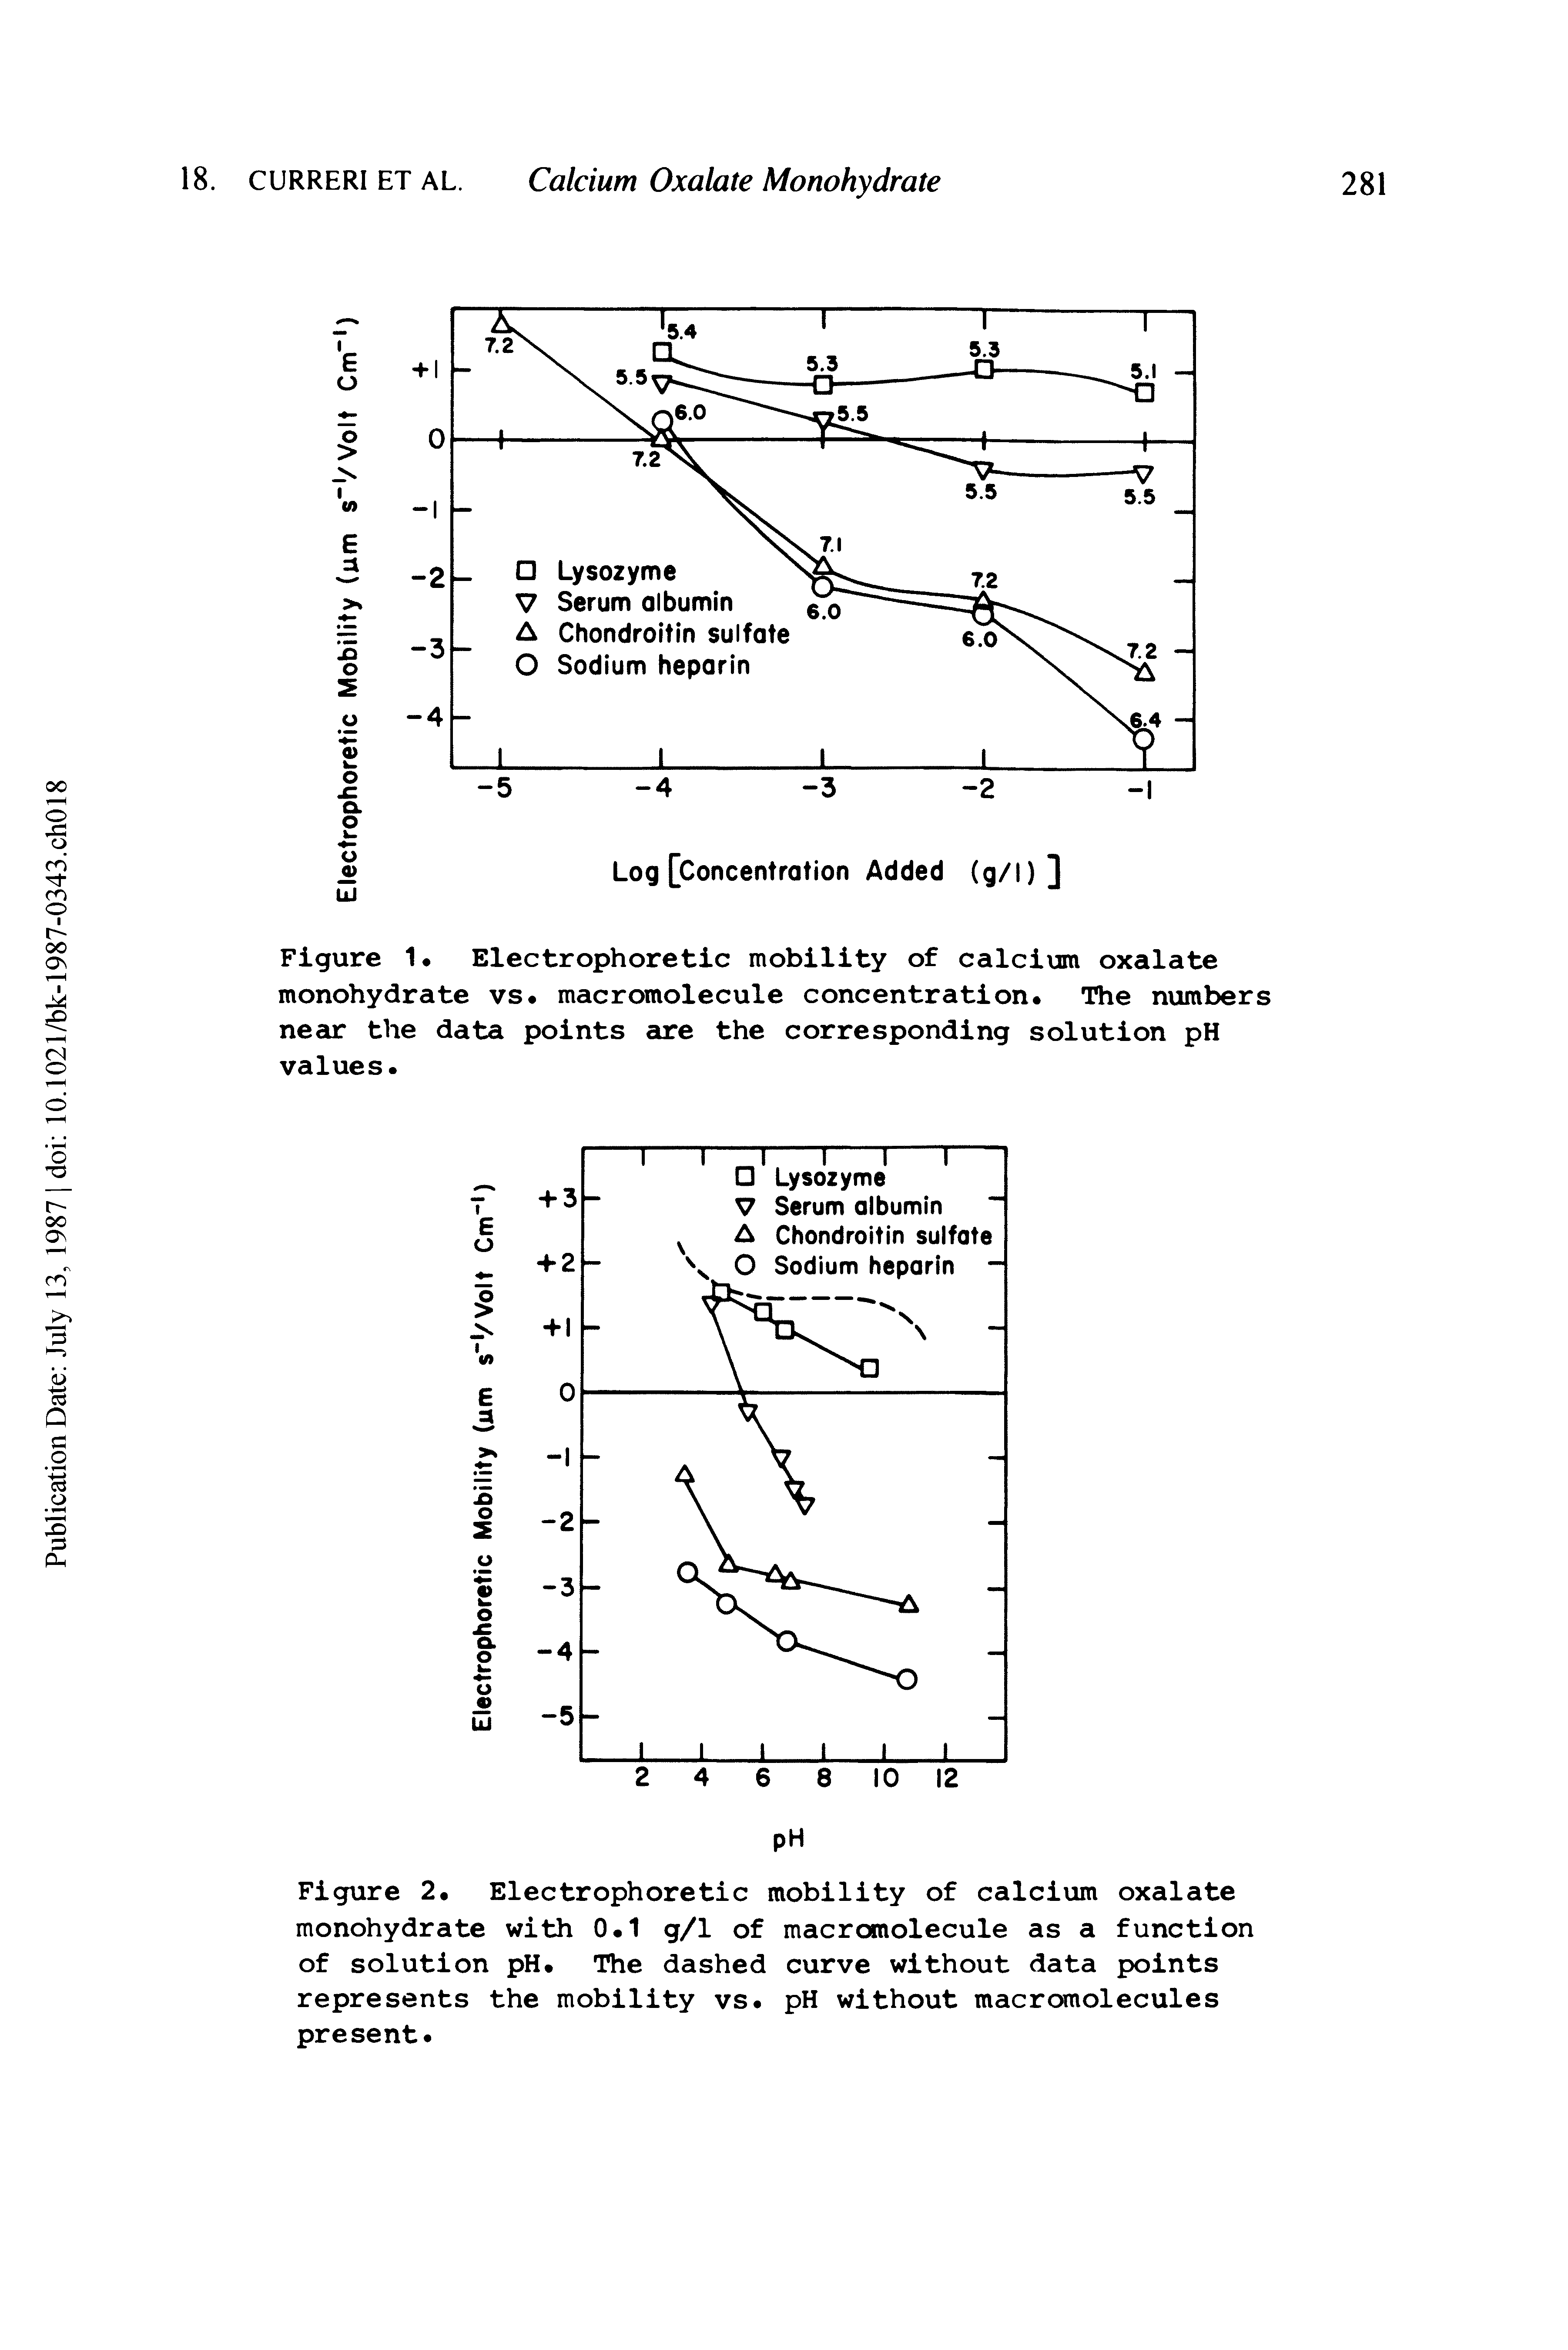 Figure 1. Electrophoretic mobility of calcium oxalate monohydrate vs macromolecule concentration. The numbers near the data points are the corresponding solution pH values.